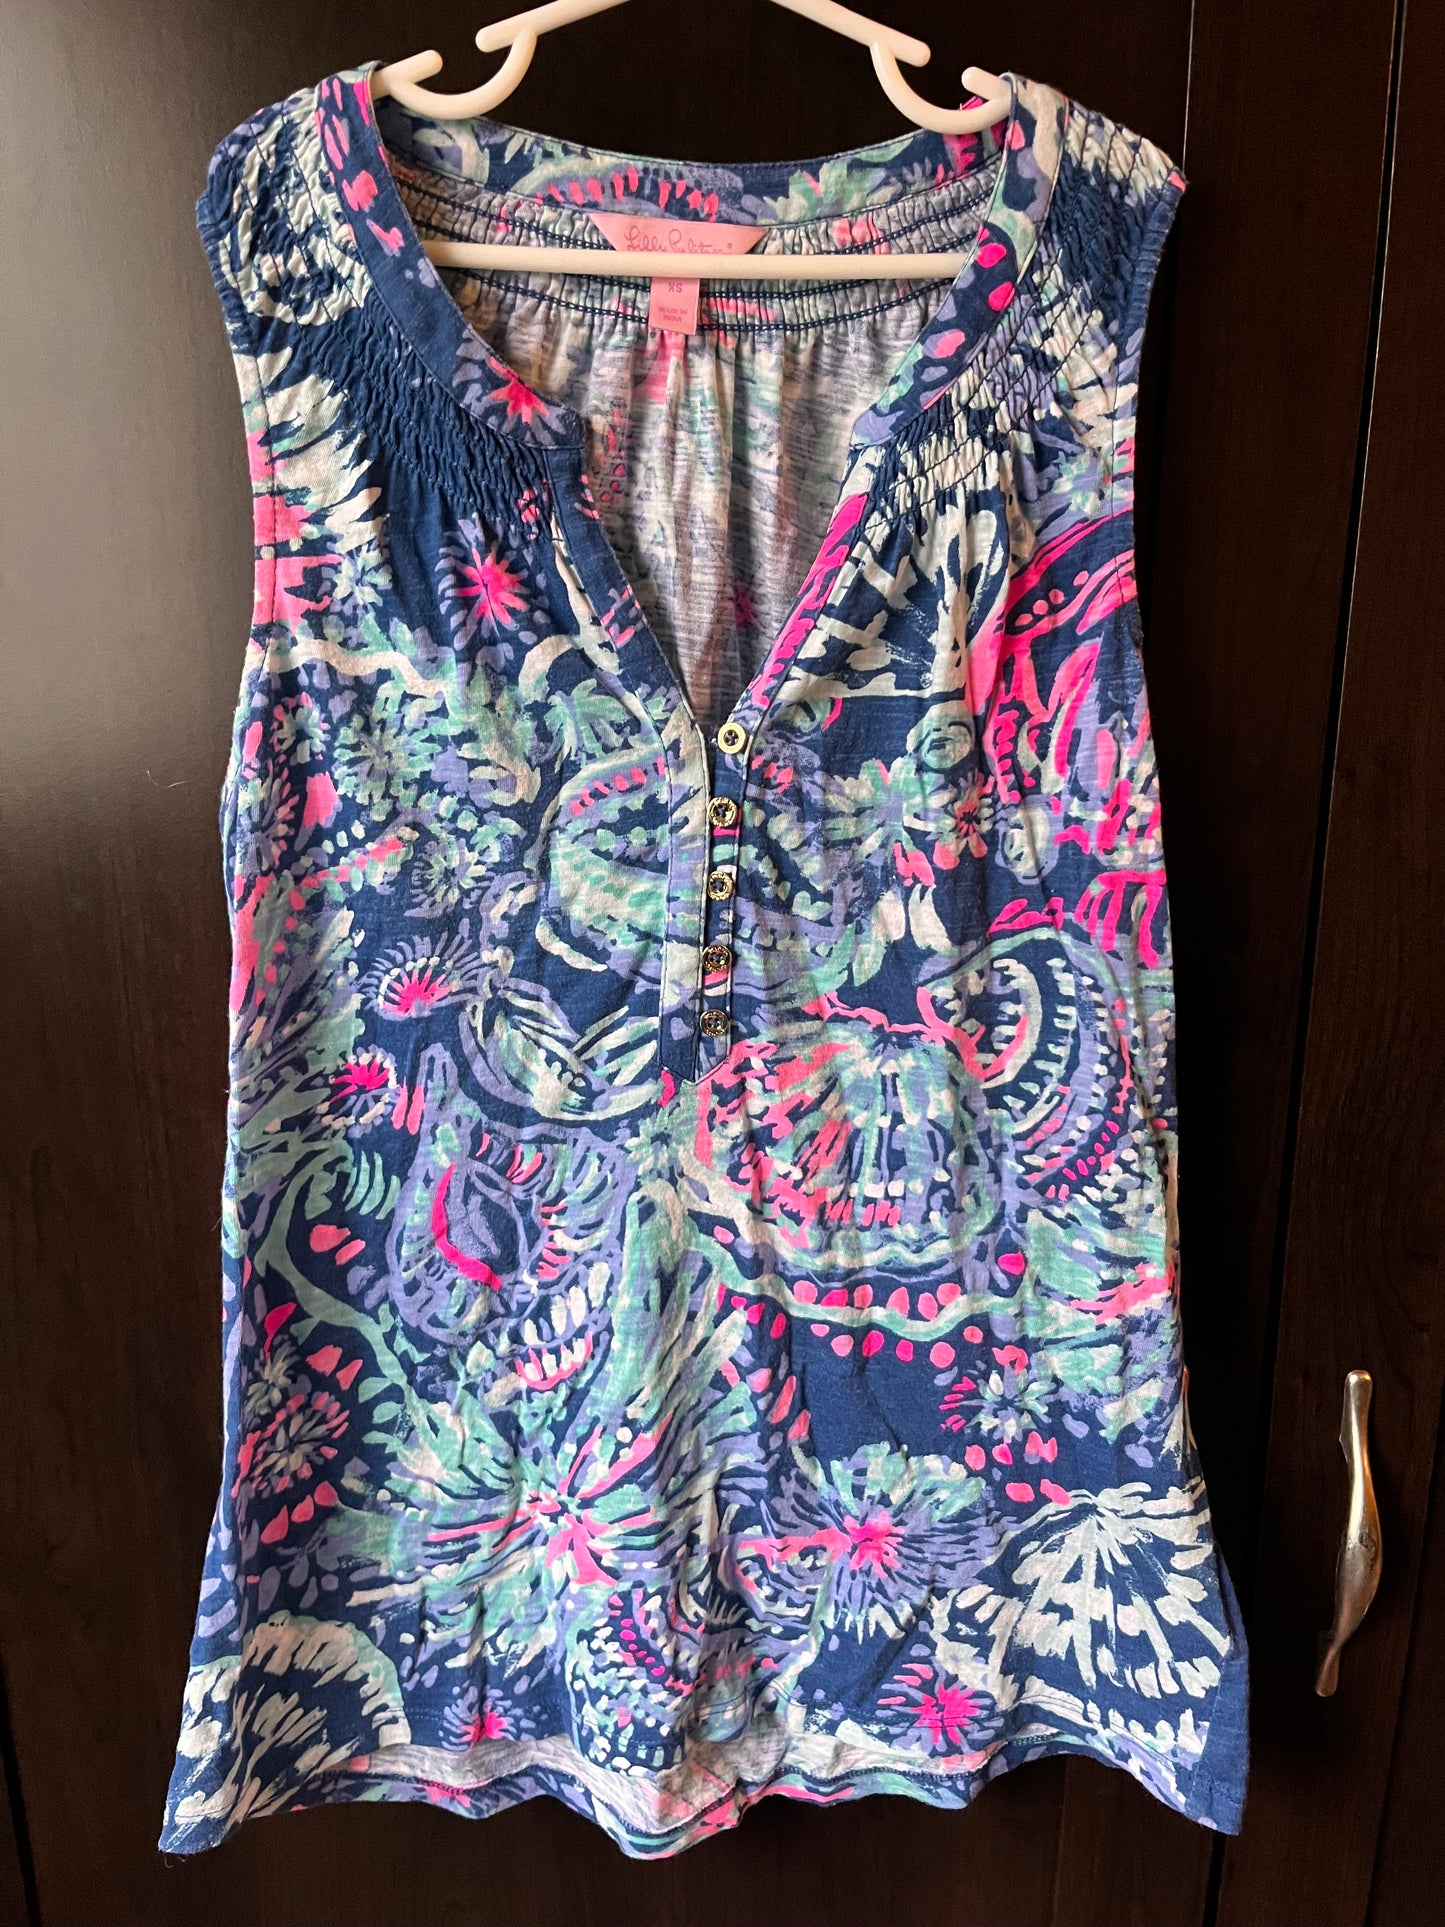 Lilly Pulitzer XS tank top